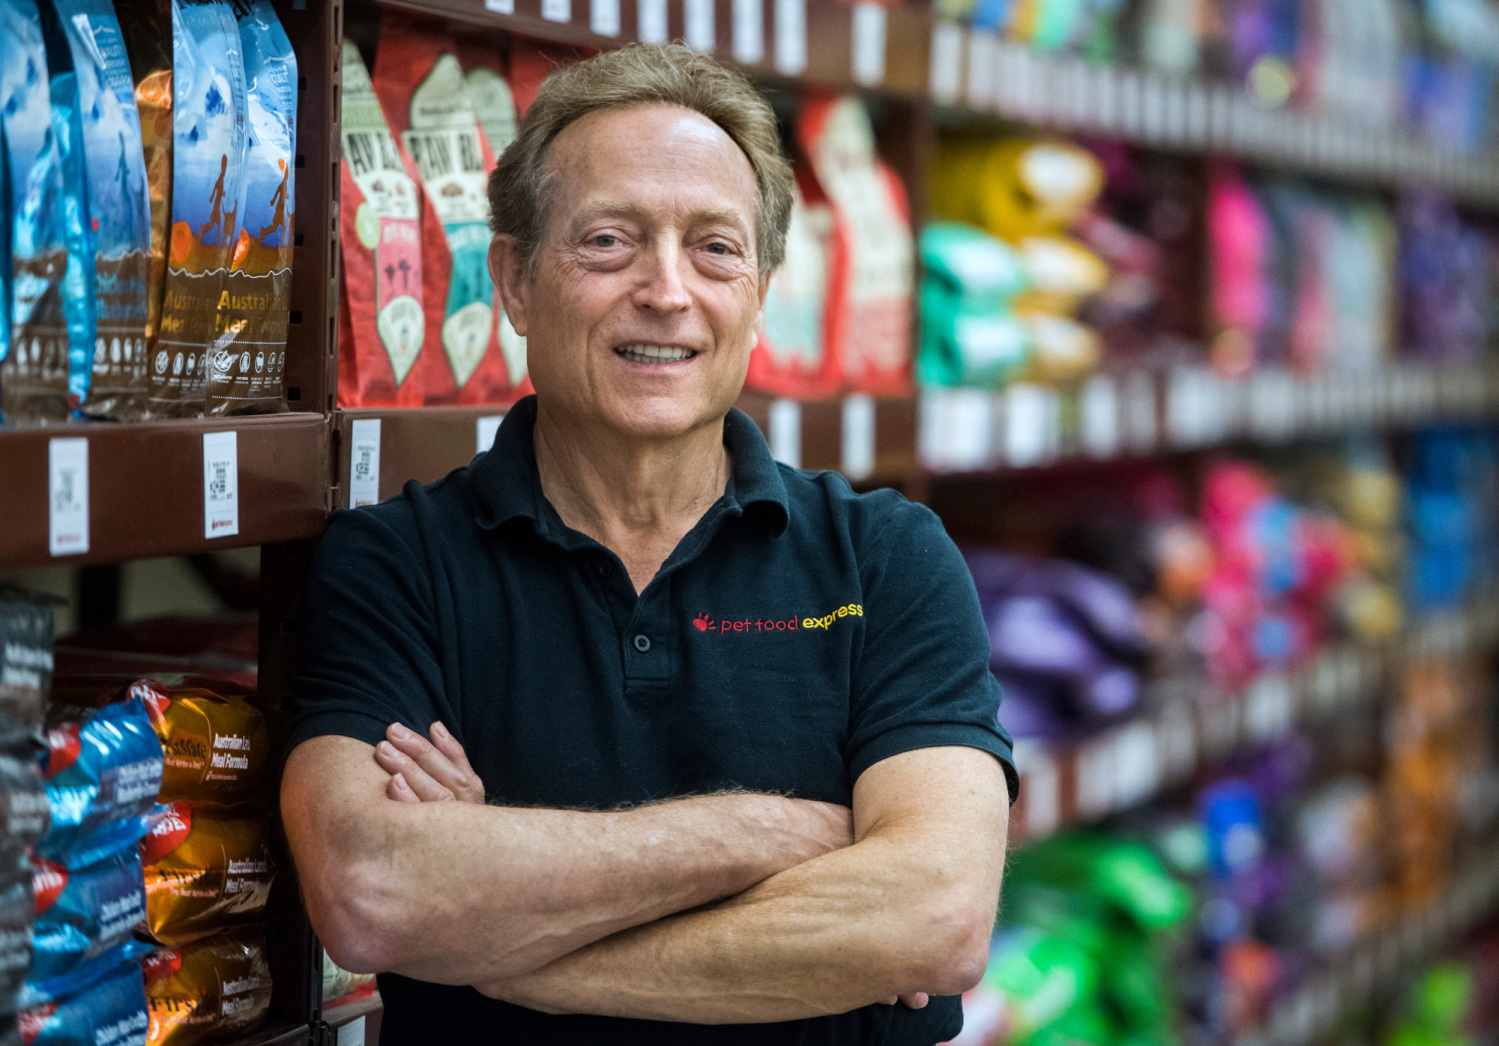 Pet Food Express CEO reflects on our everlasting love for our animals